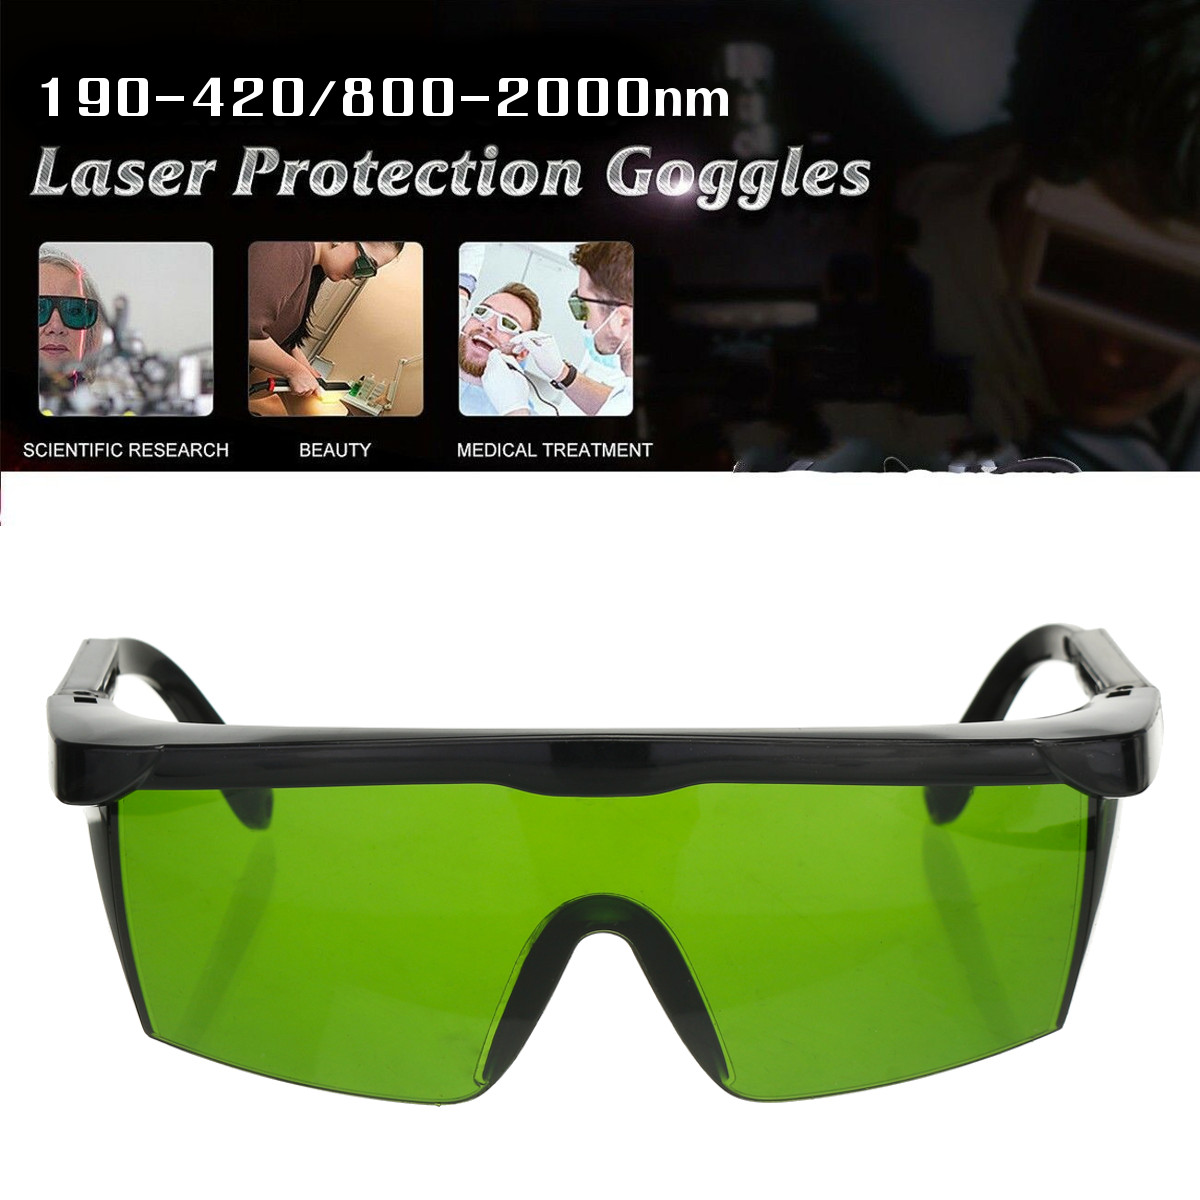 Pro-Laser-Protection-Goggles-Protective-Safety-Glasses-IPL-OD4D-190nm-2000nm-Laser-Goggles-1424199-5